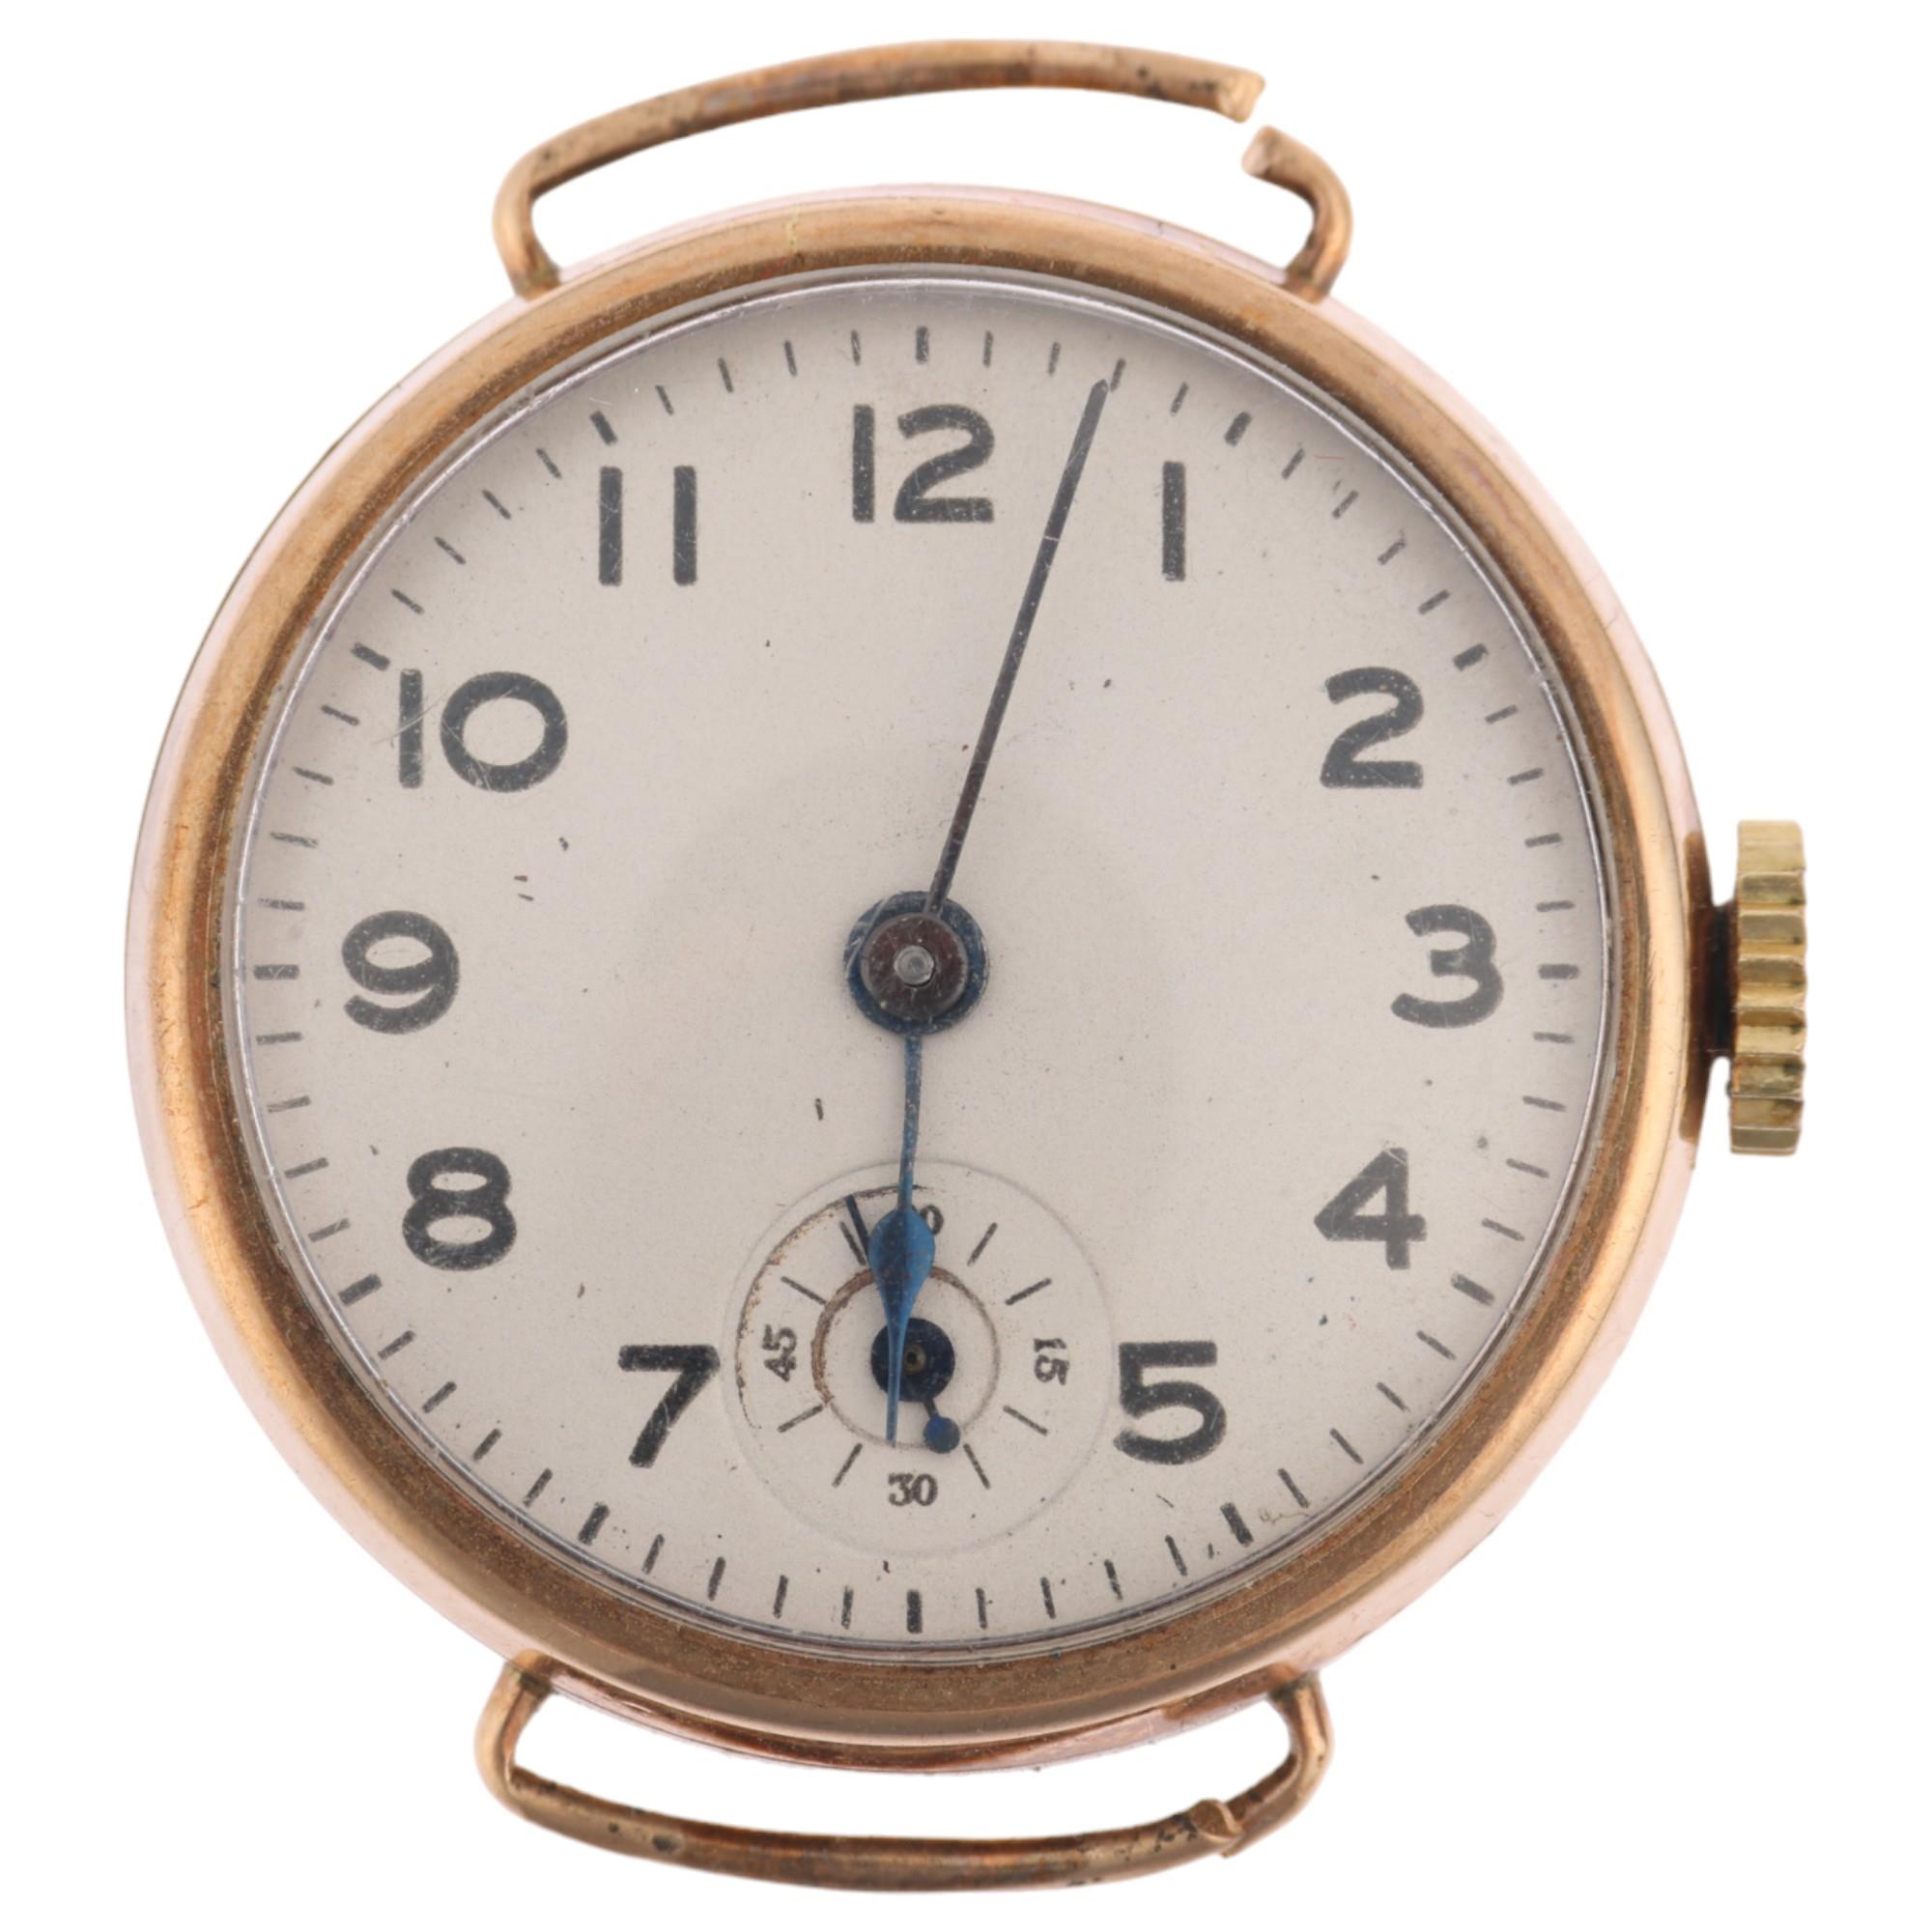 OMEGA - an early 20th century 9ct gold Officer's style mechanical wristwatch head, silvered dial